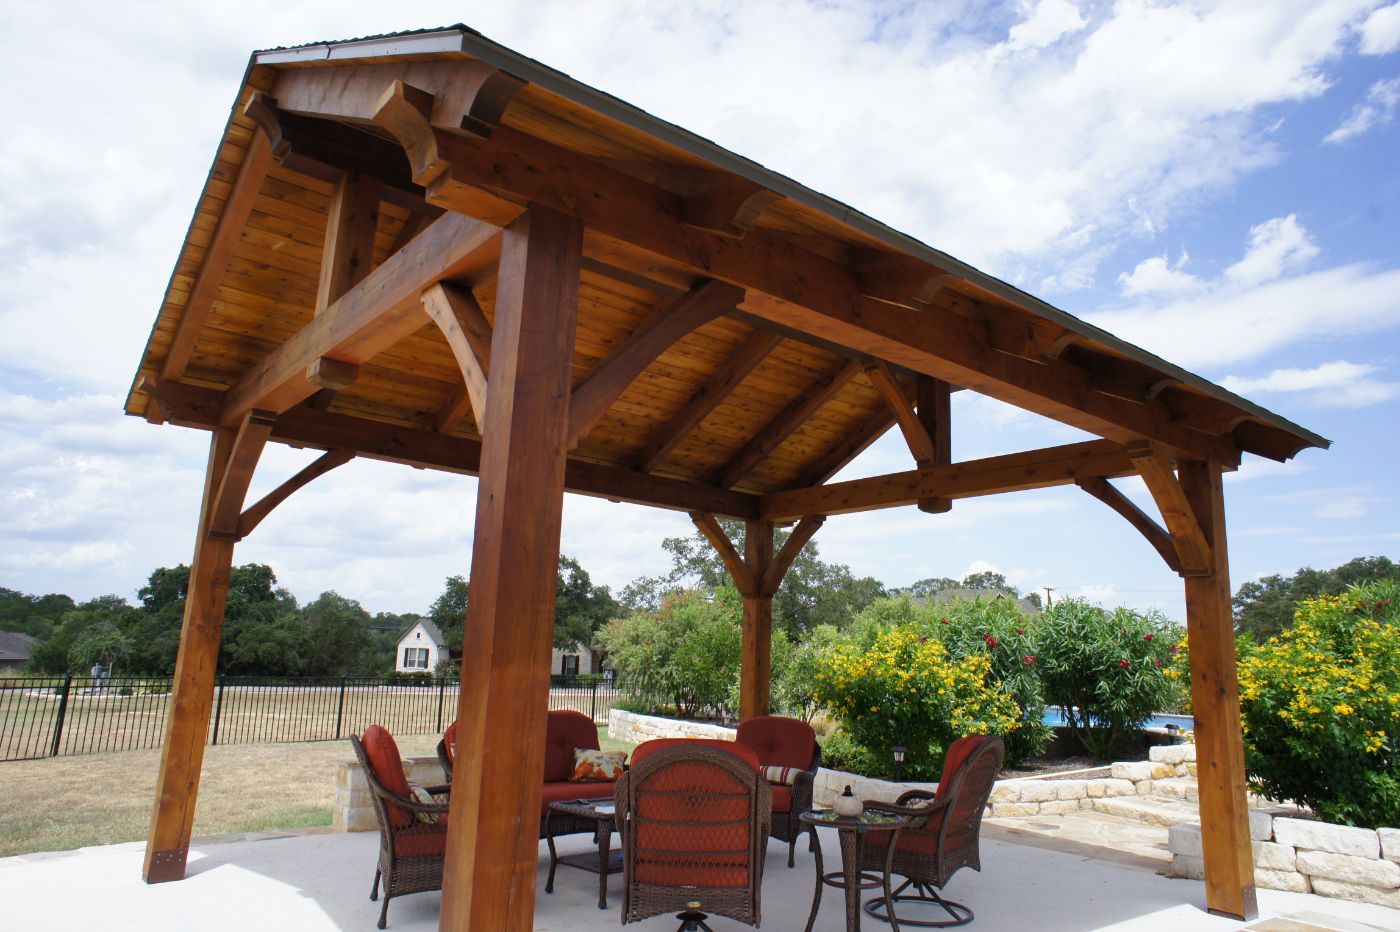 17’ x 19’, King Post, Heavy Timbers, Cement or concrete Pad, patio furniture, residential, covered patio, outdoor living, entertaining, builder/contractor, san Antonio, helotes, free standing pavilion, designs, post and beam